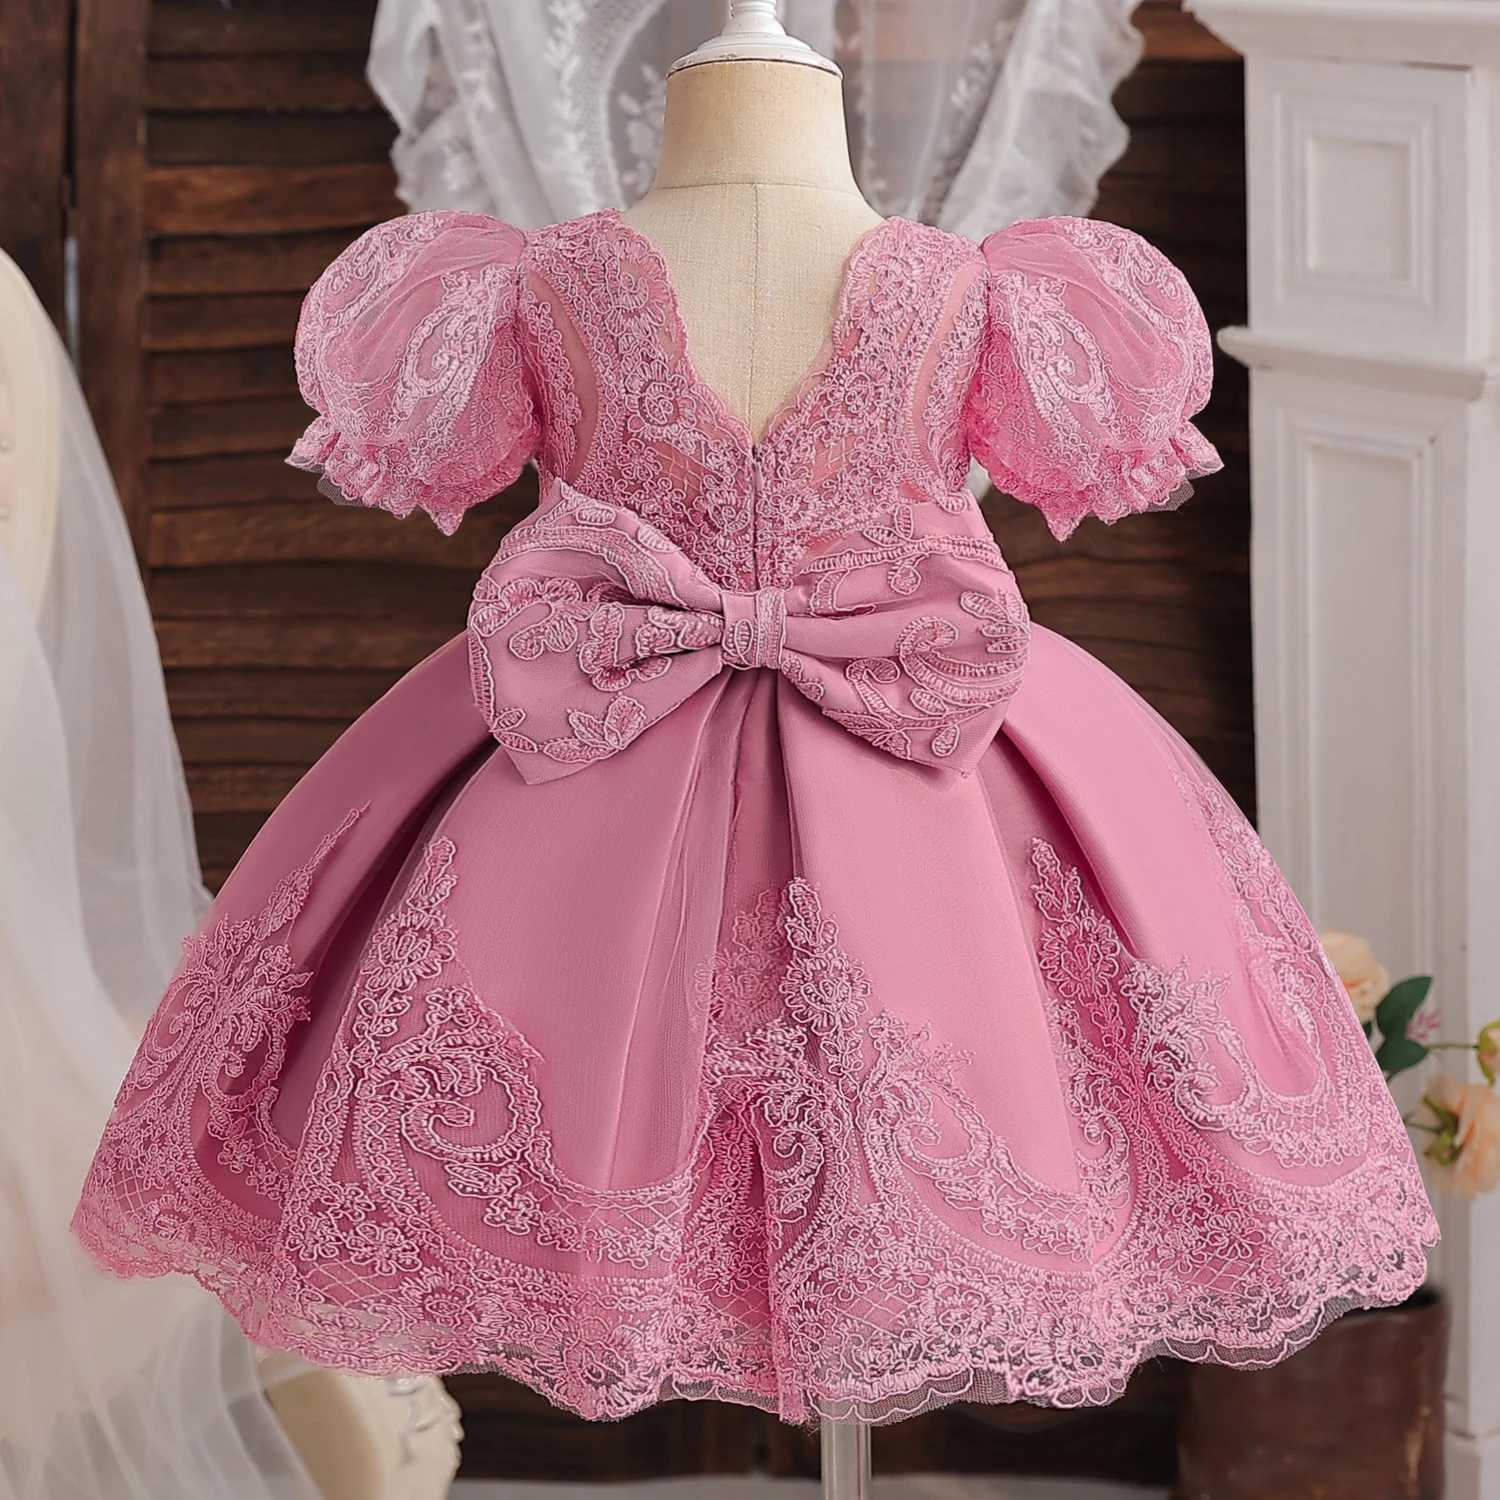 Girl's Dresses Embroidery Lace Floral Baby Dress Pink Flower Girl Dress for Wedding Ceremony Kids 1 Year Birthday Beaded Princess Costume 0-5T